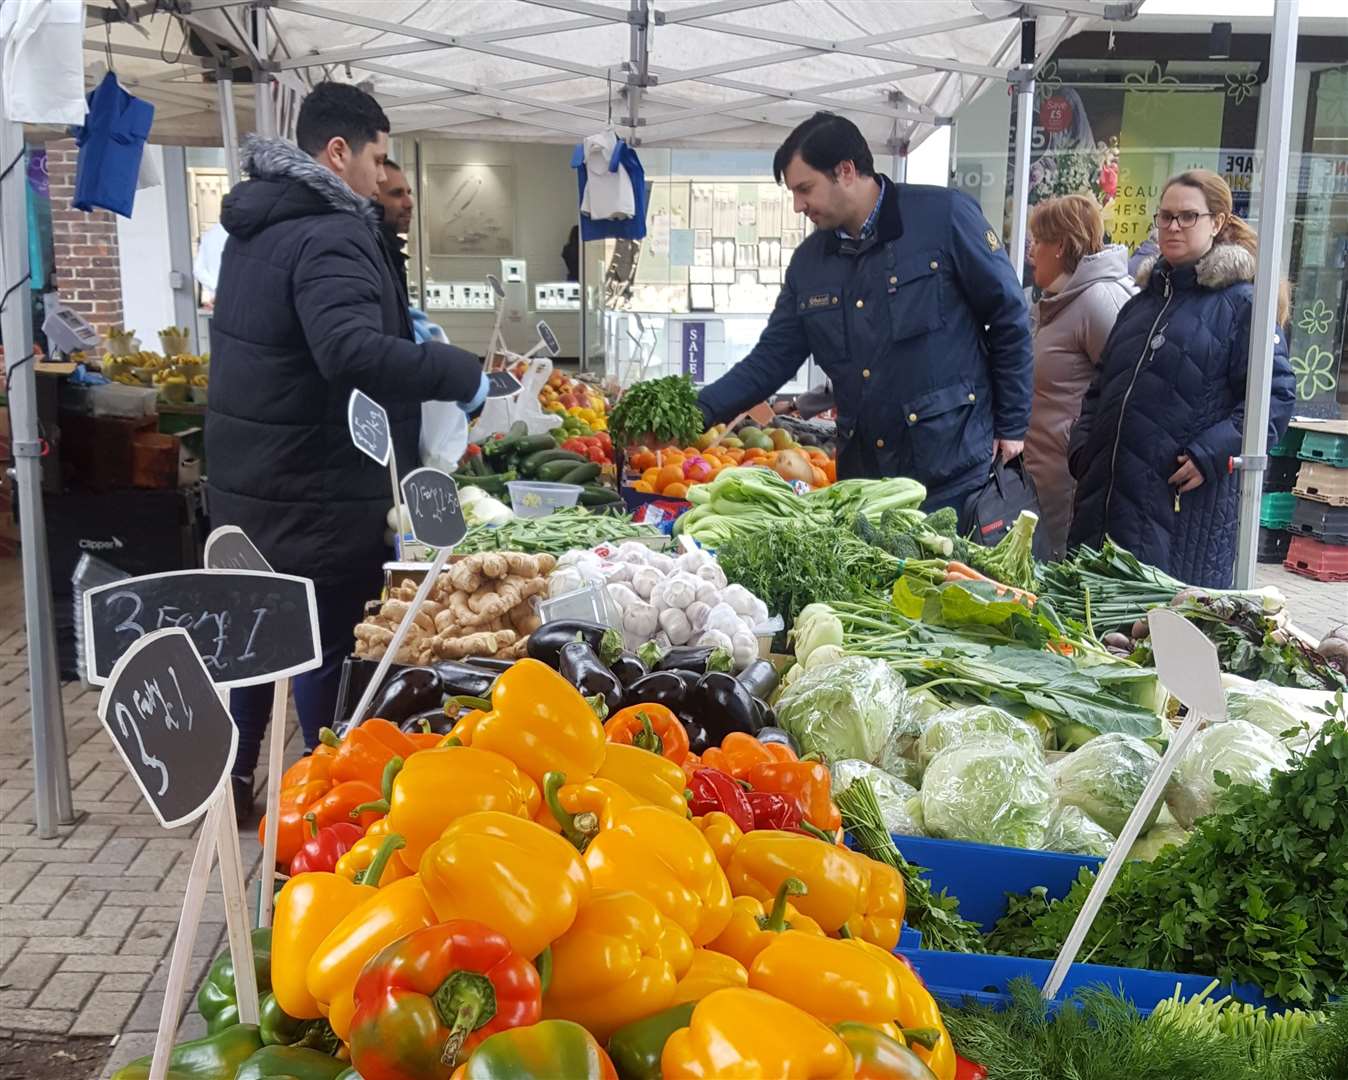 Punters buying fruit and veg at the market